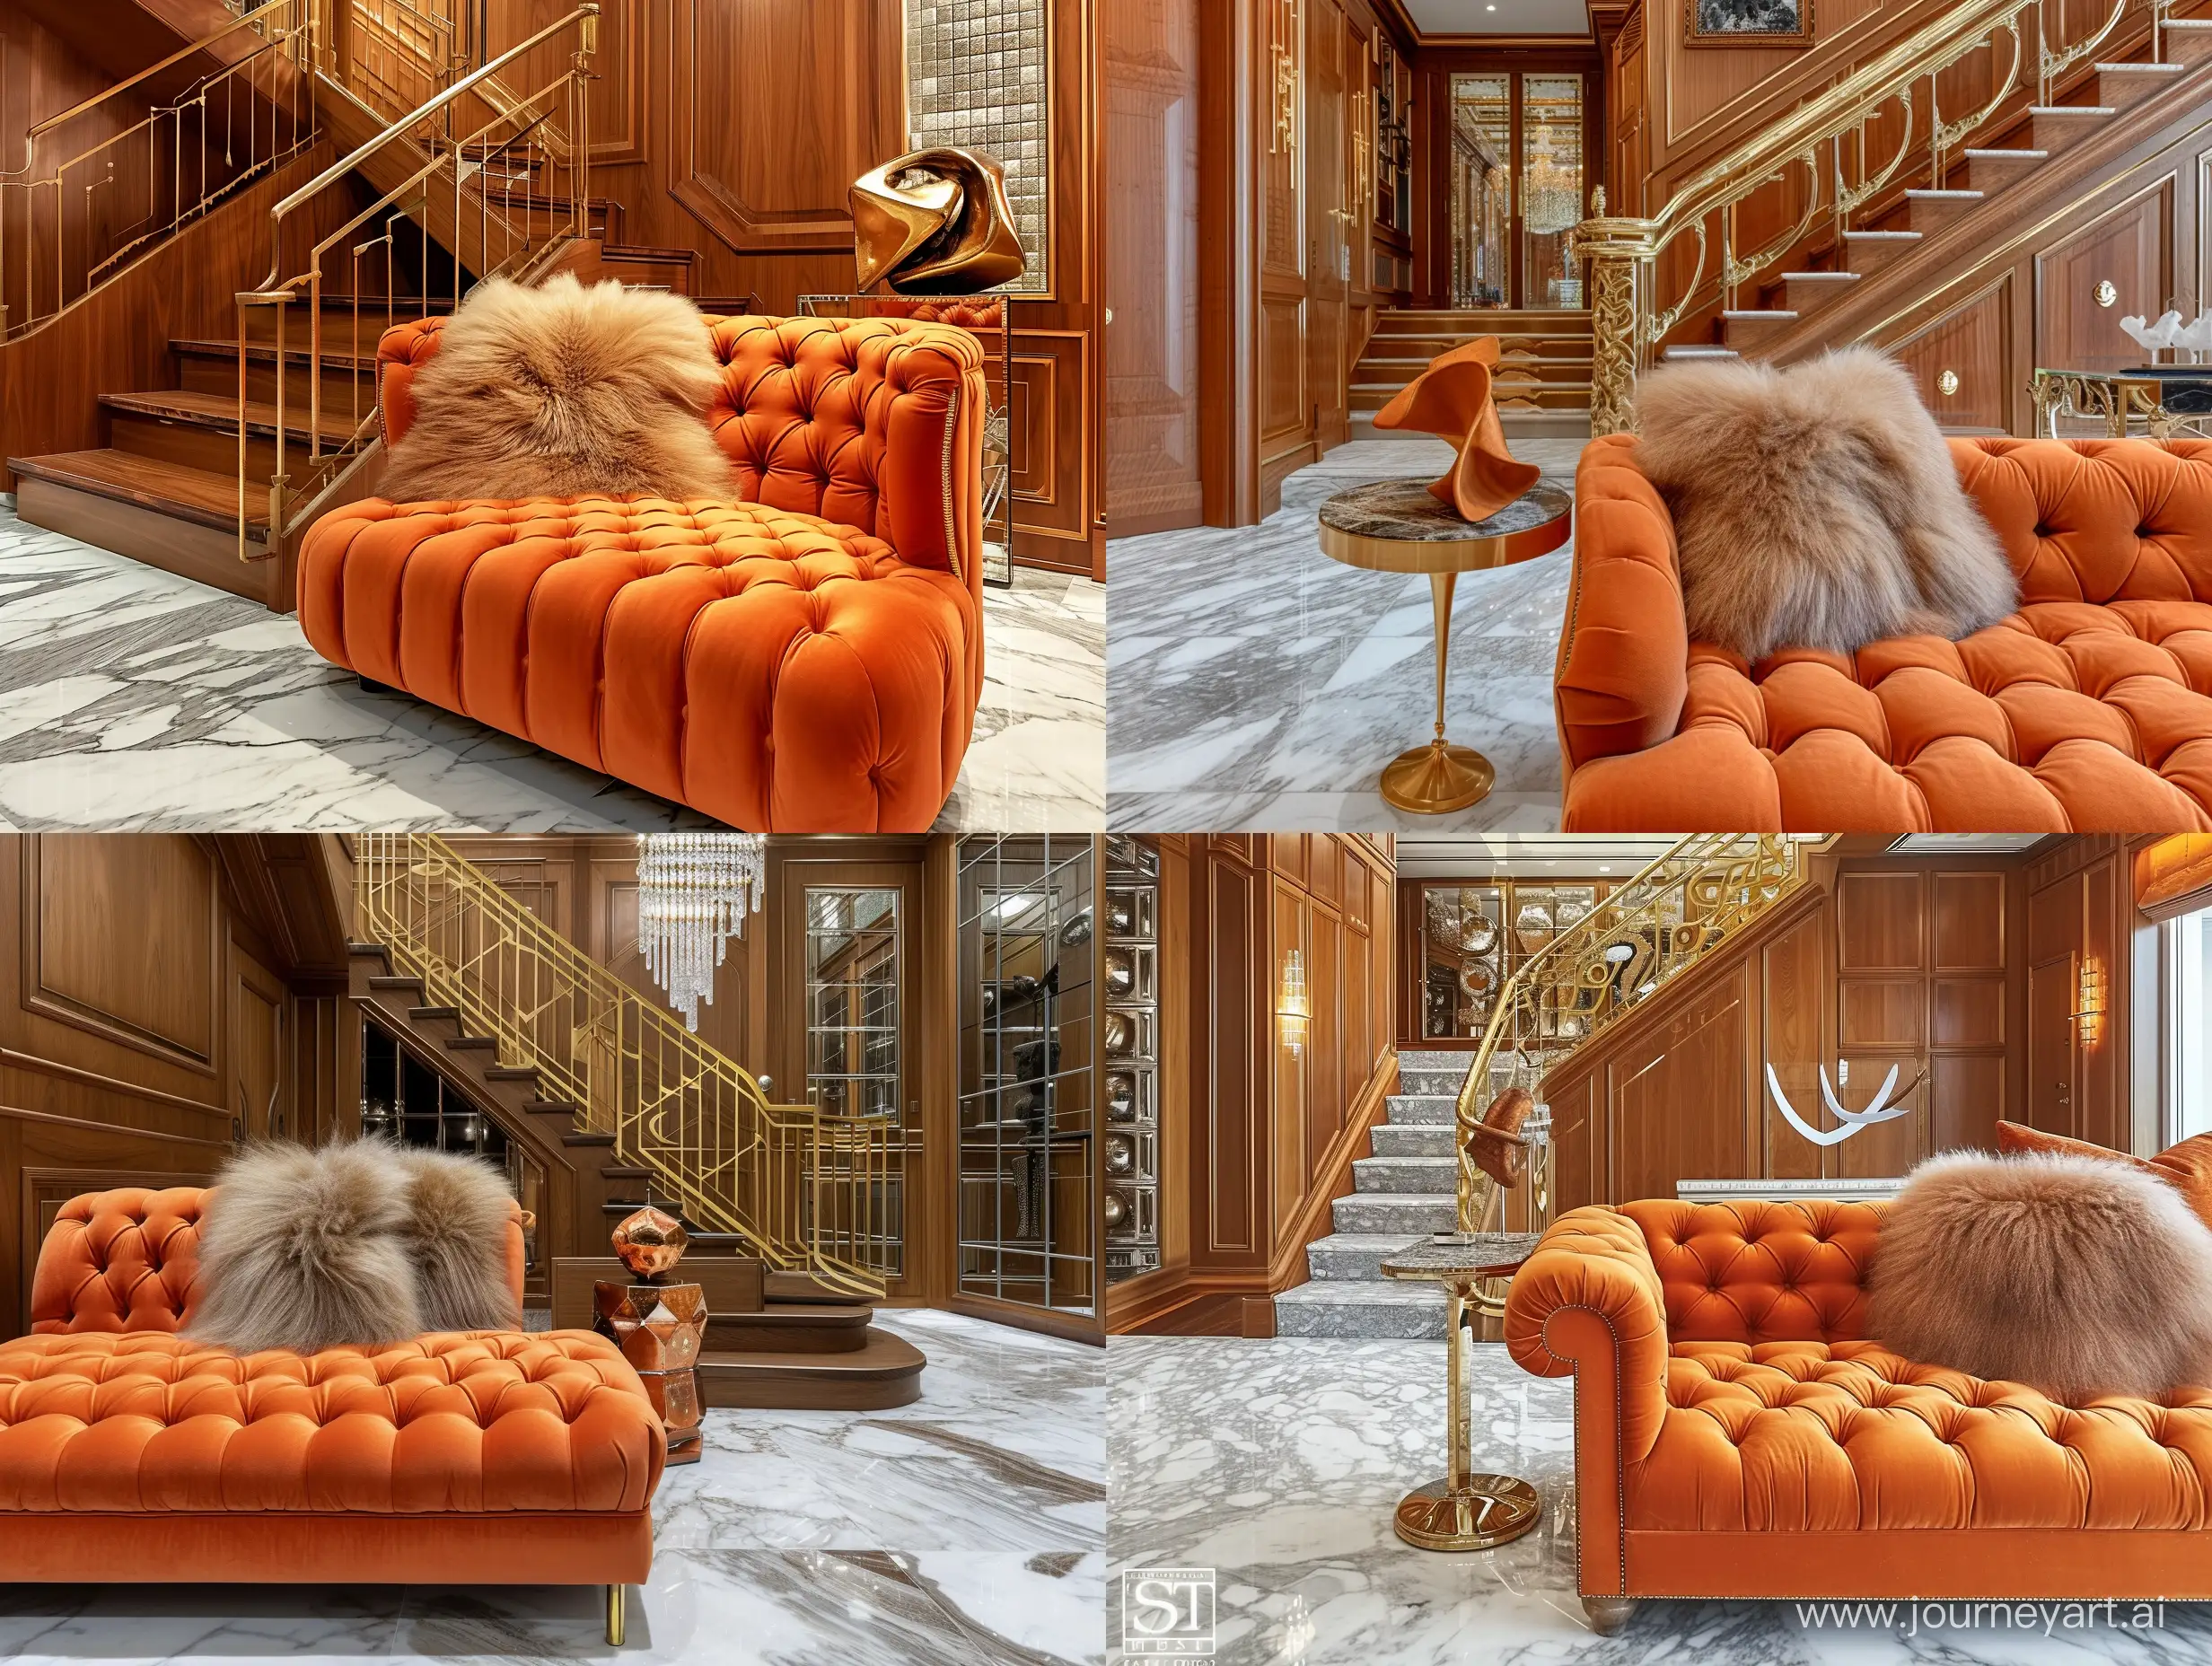 A plush, orange tufted couch adorned with a faux fur throw pillow, creating a cozy and inviting atmosphere.
An elegant marble floor that lends a touch of sophistication and luxury to the area.
Warm and texturized wood paneling on the walls.
An intriguing staircase with a unique design and a golden railing that adds opulence to the setting.
Wall paneling furnished with built-in mirrors, offering visual interest and creating the illusion of more space.
Modern decor pieces, such as the abstract sculpture placed on a side table, complement the overall aesthetic of the room.